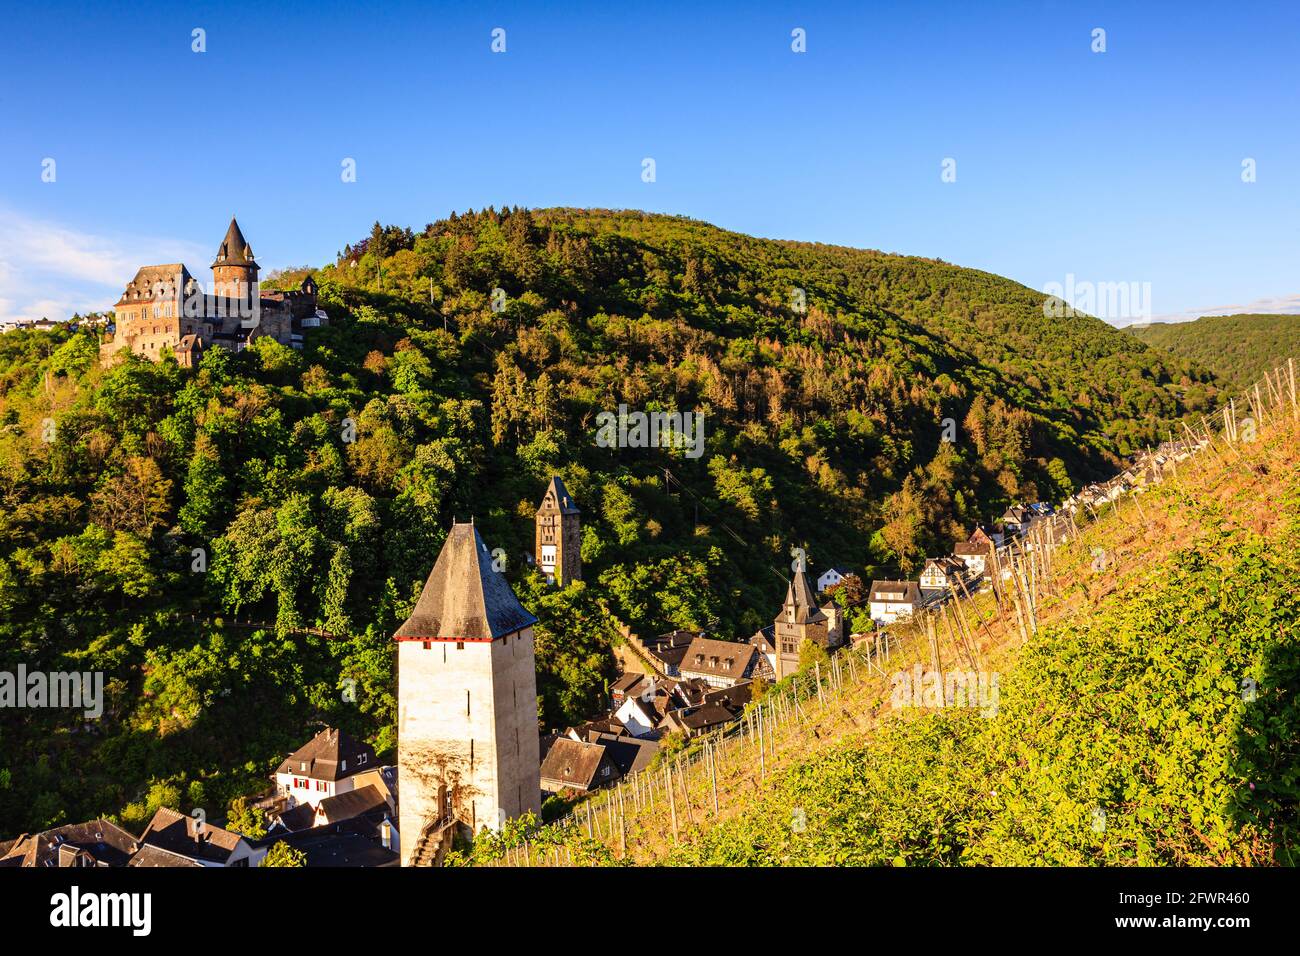 Stahleck castle at dawn, Bacharach, rhine valley, Germany, Europe Stock Photo